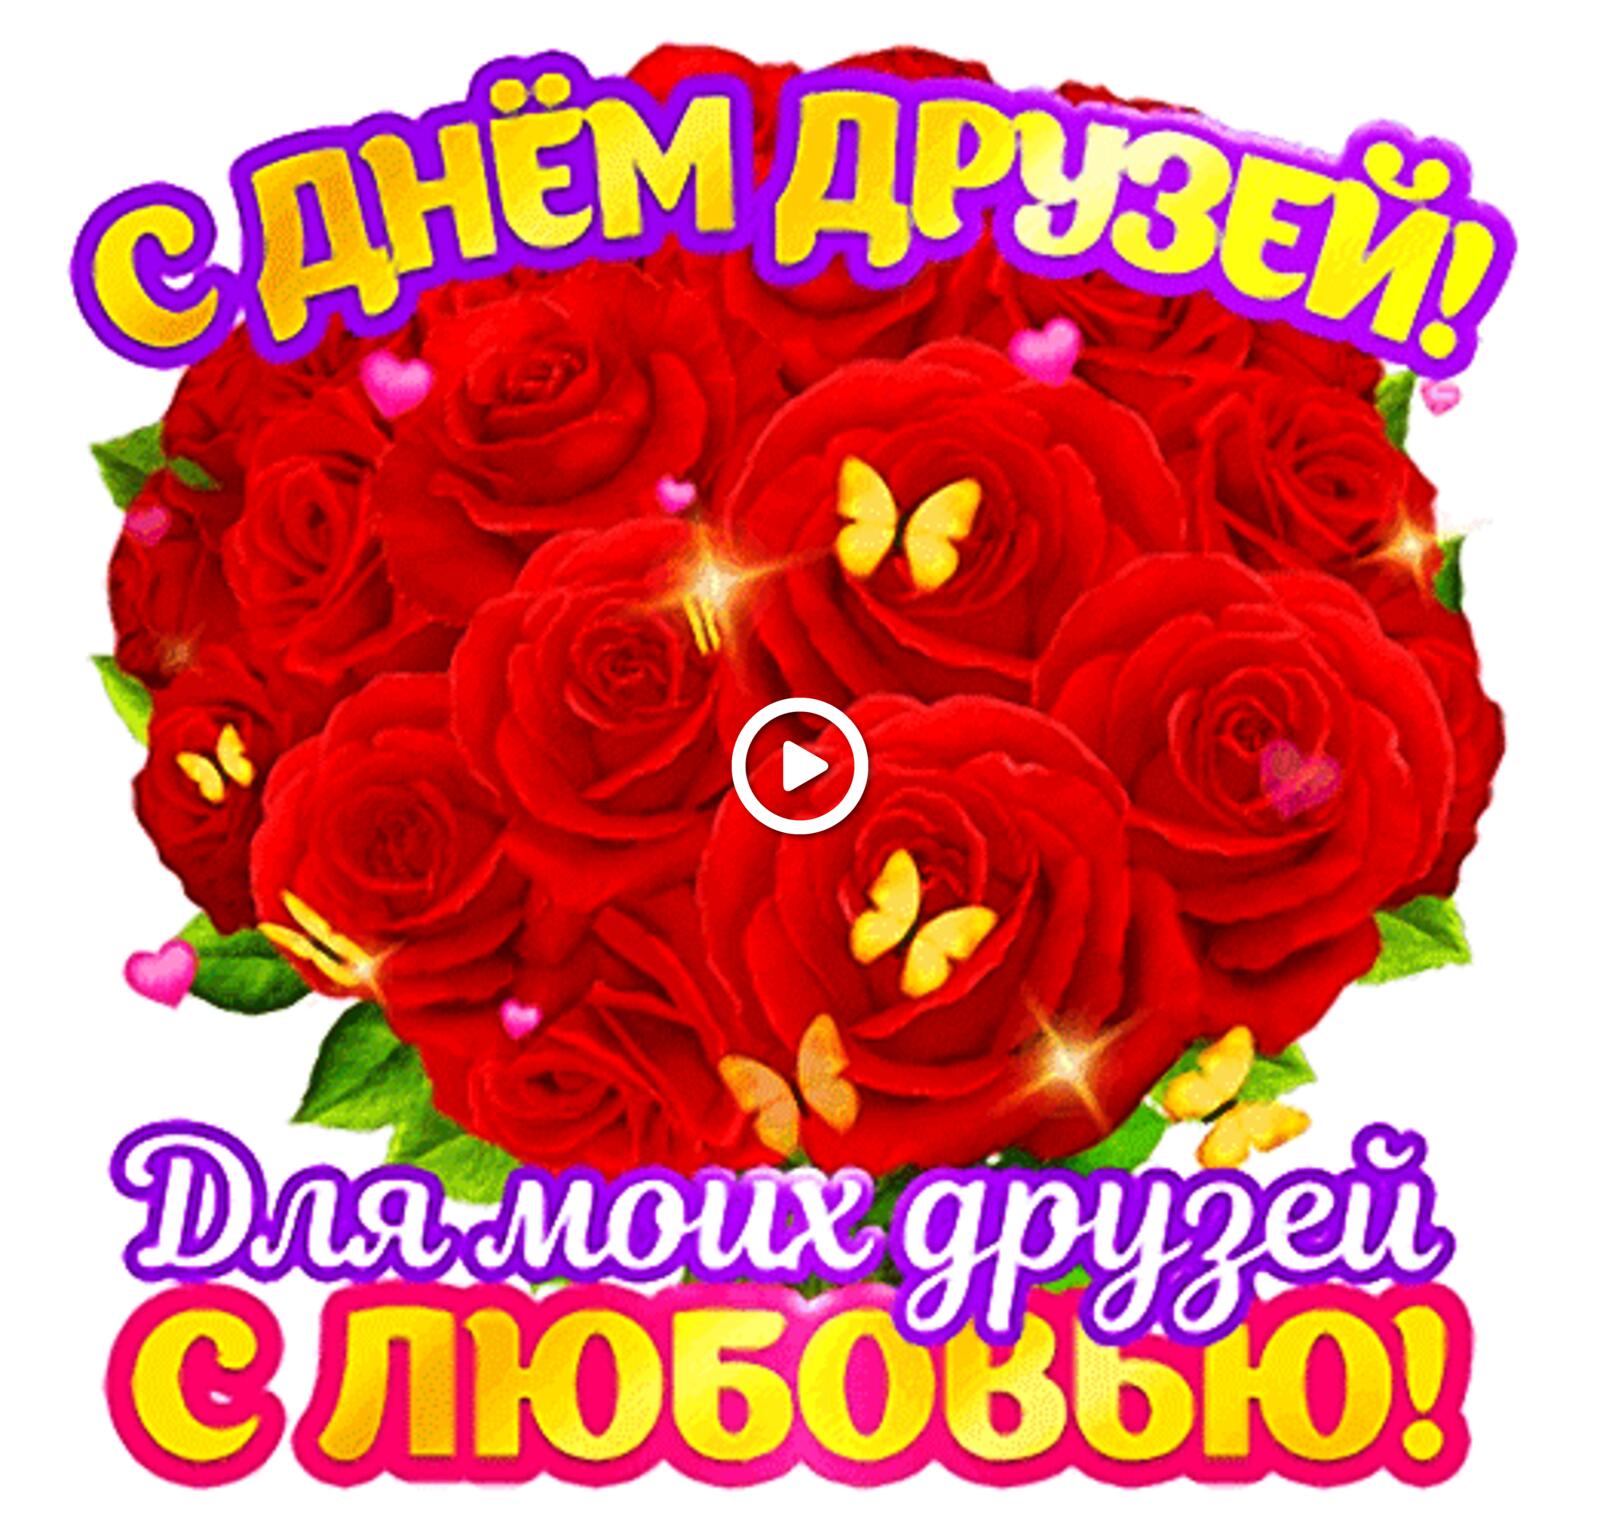 A postcard on the subject of bouquet of roses friends day for you for free